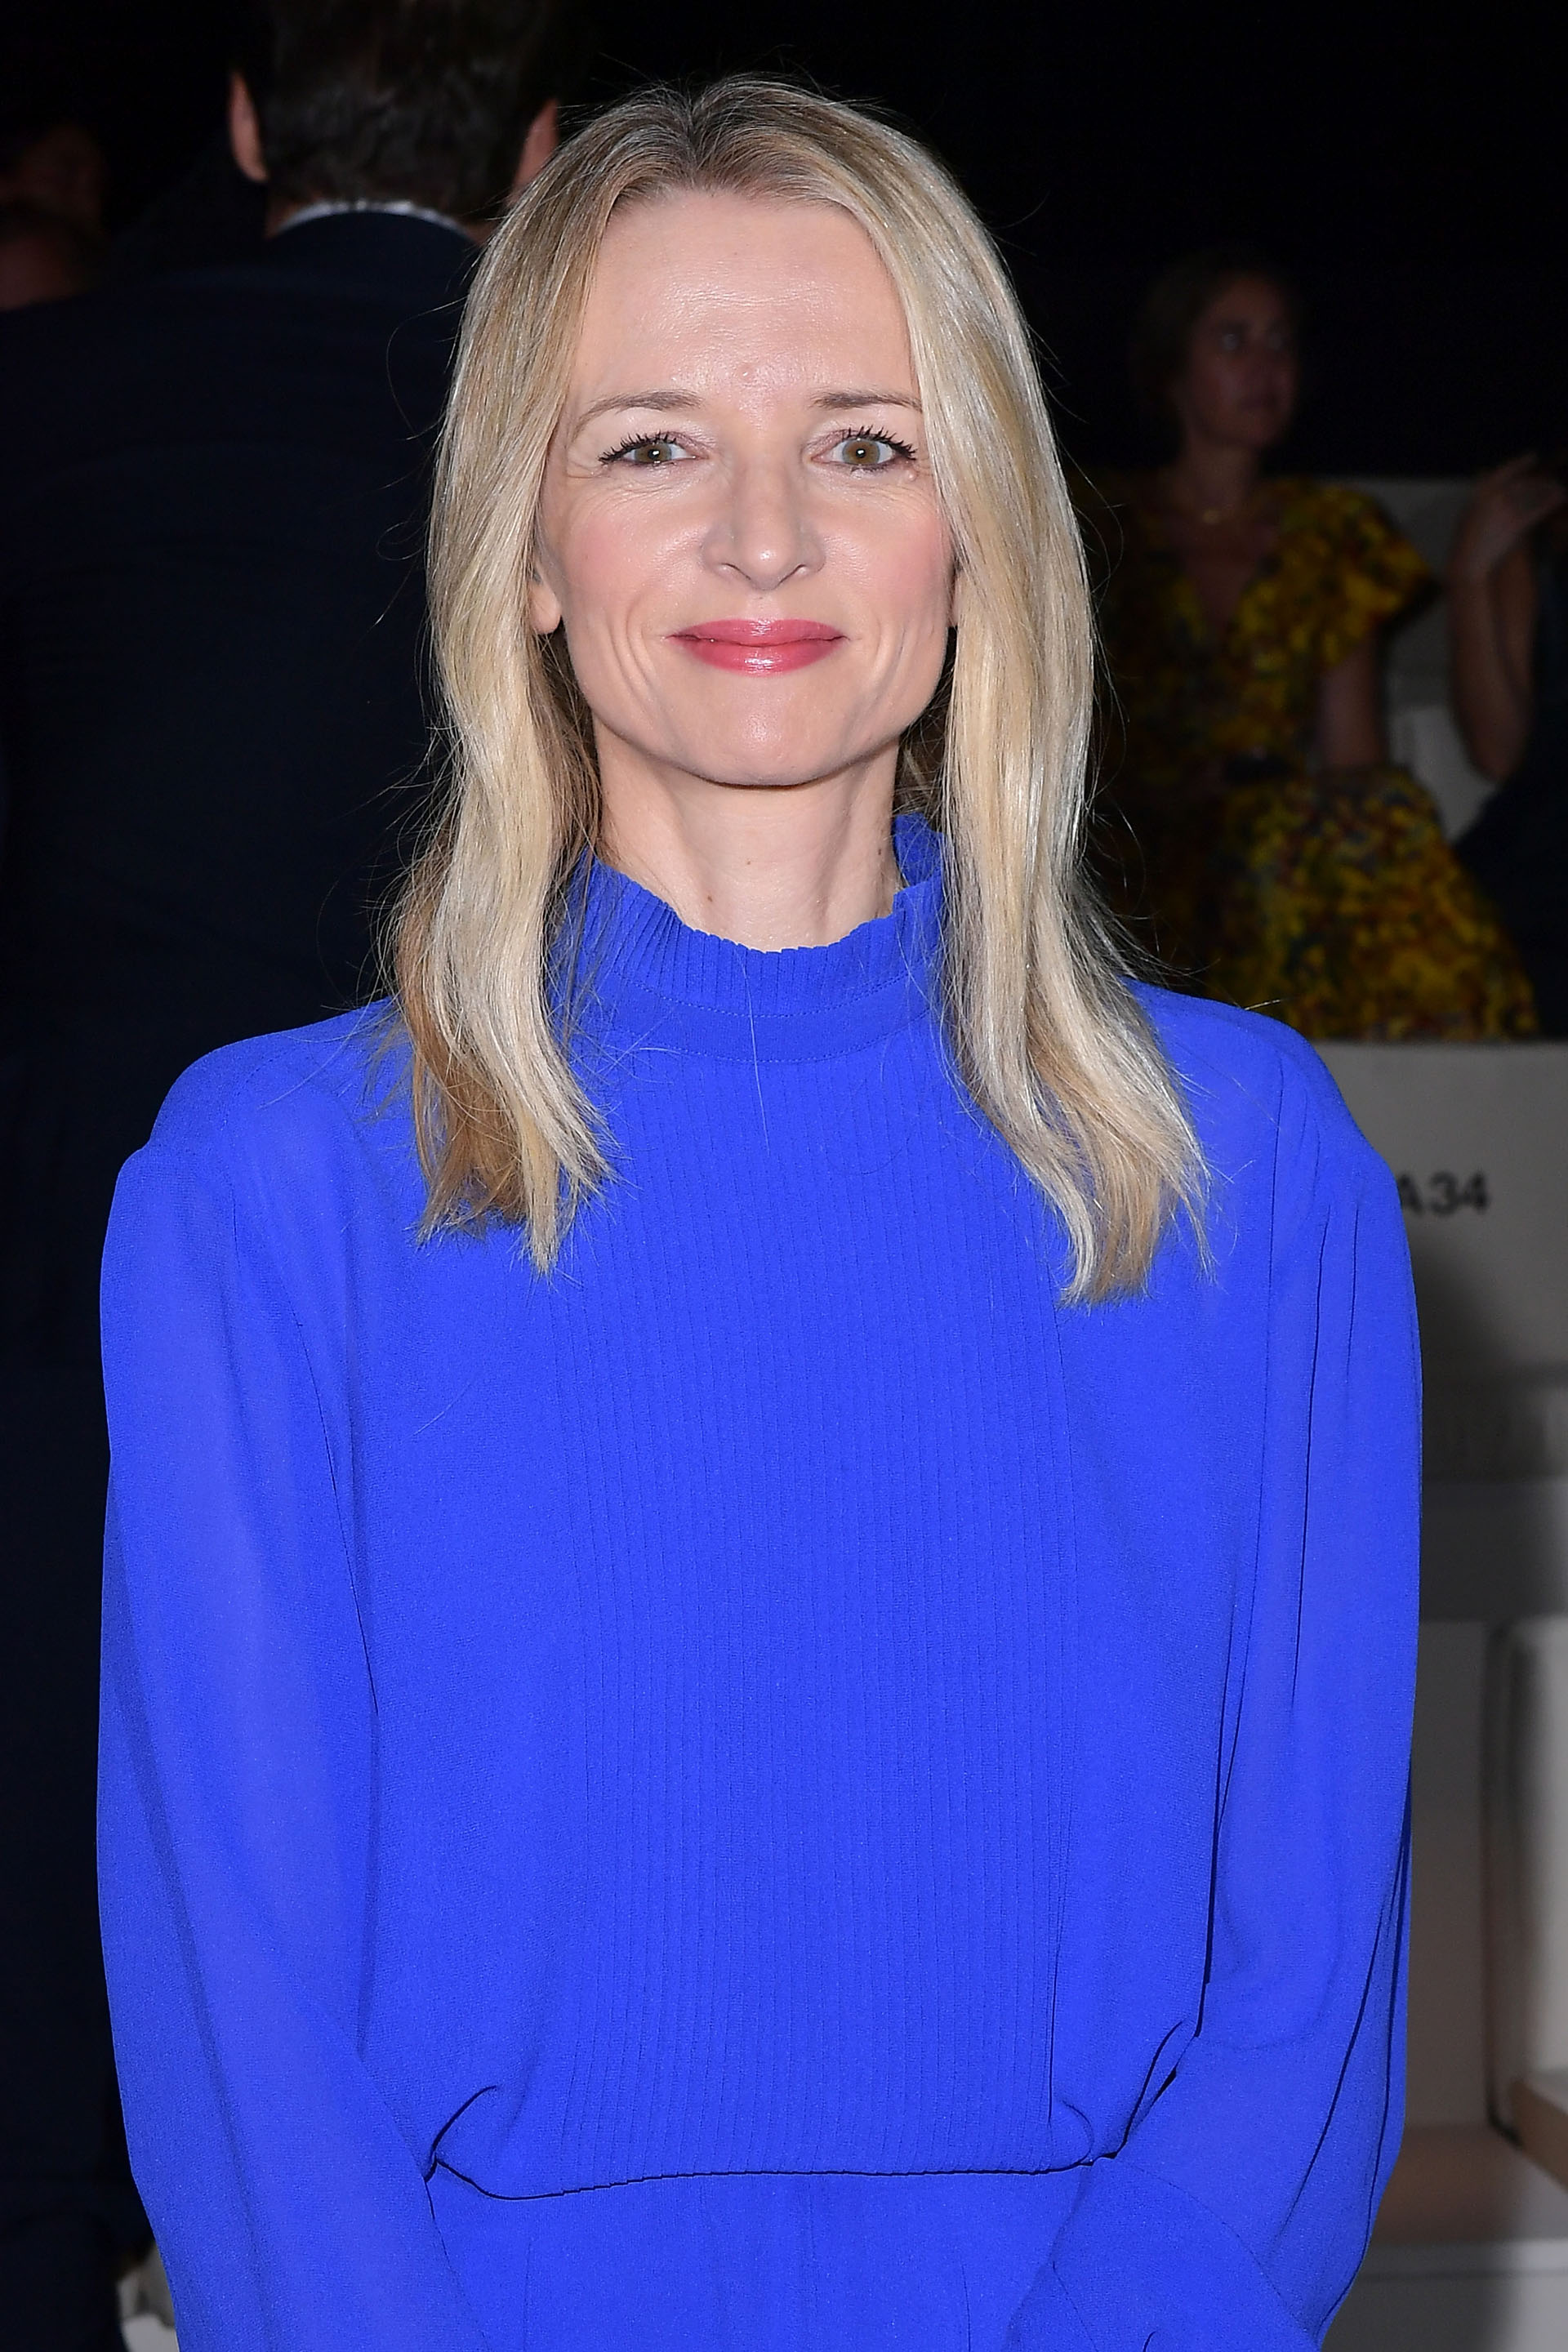 Delphine Arnault during an event in July 2022 in Paris (Dominique Charriau/WireImage)